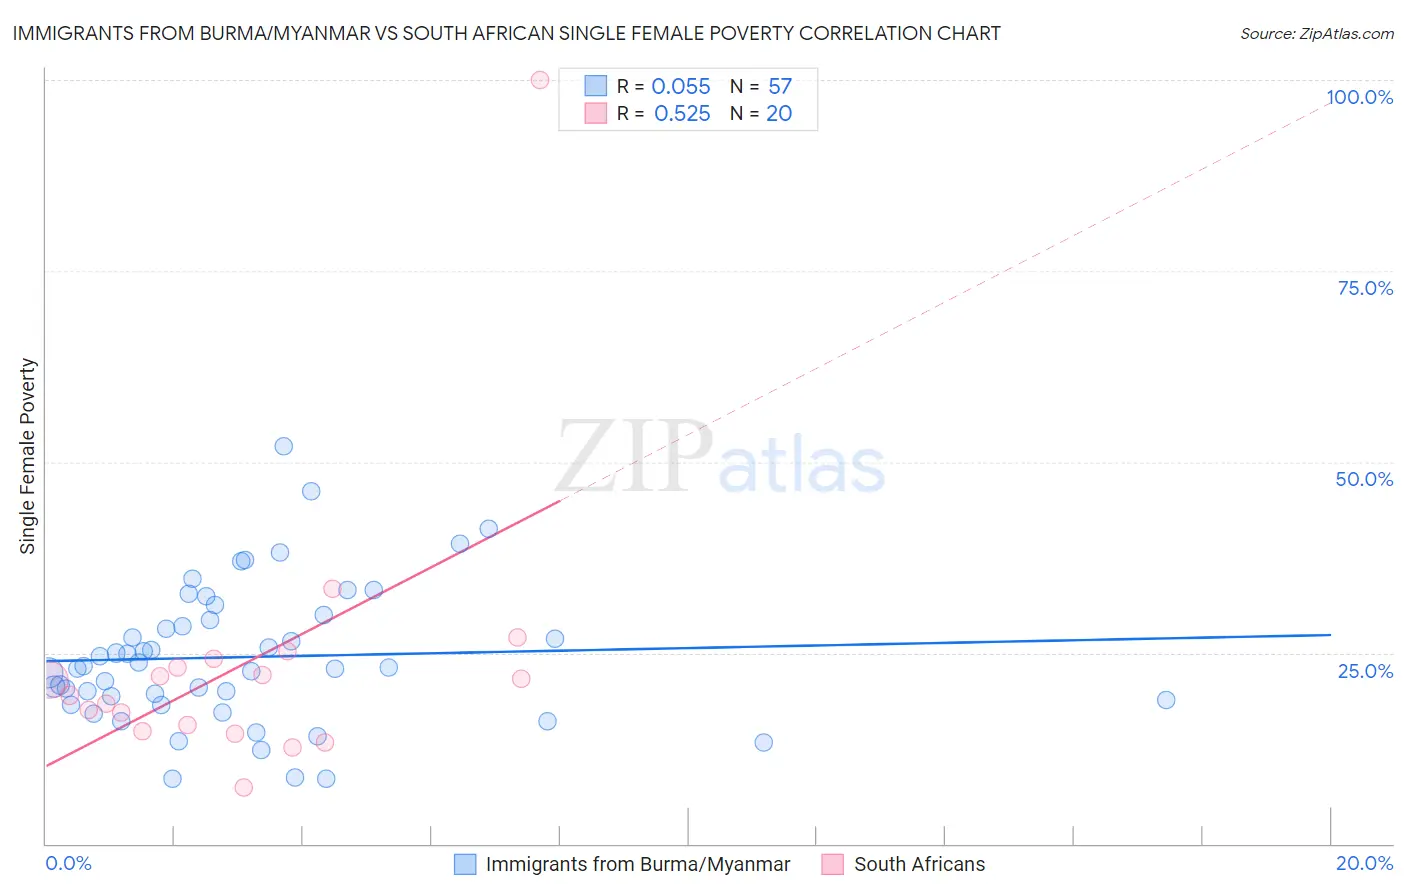 Immigrants from Burma/Myanmar vs South African Single Female Poverty